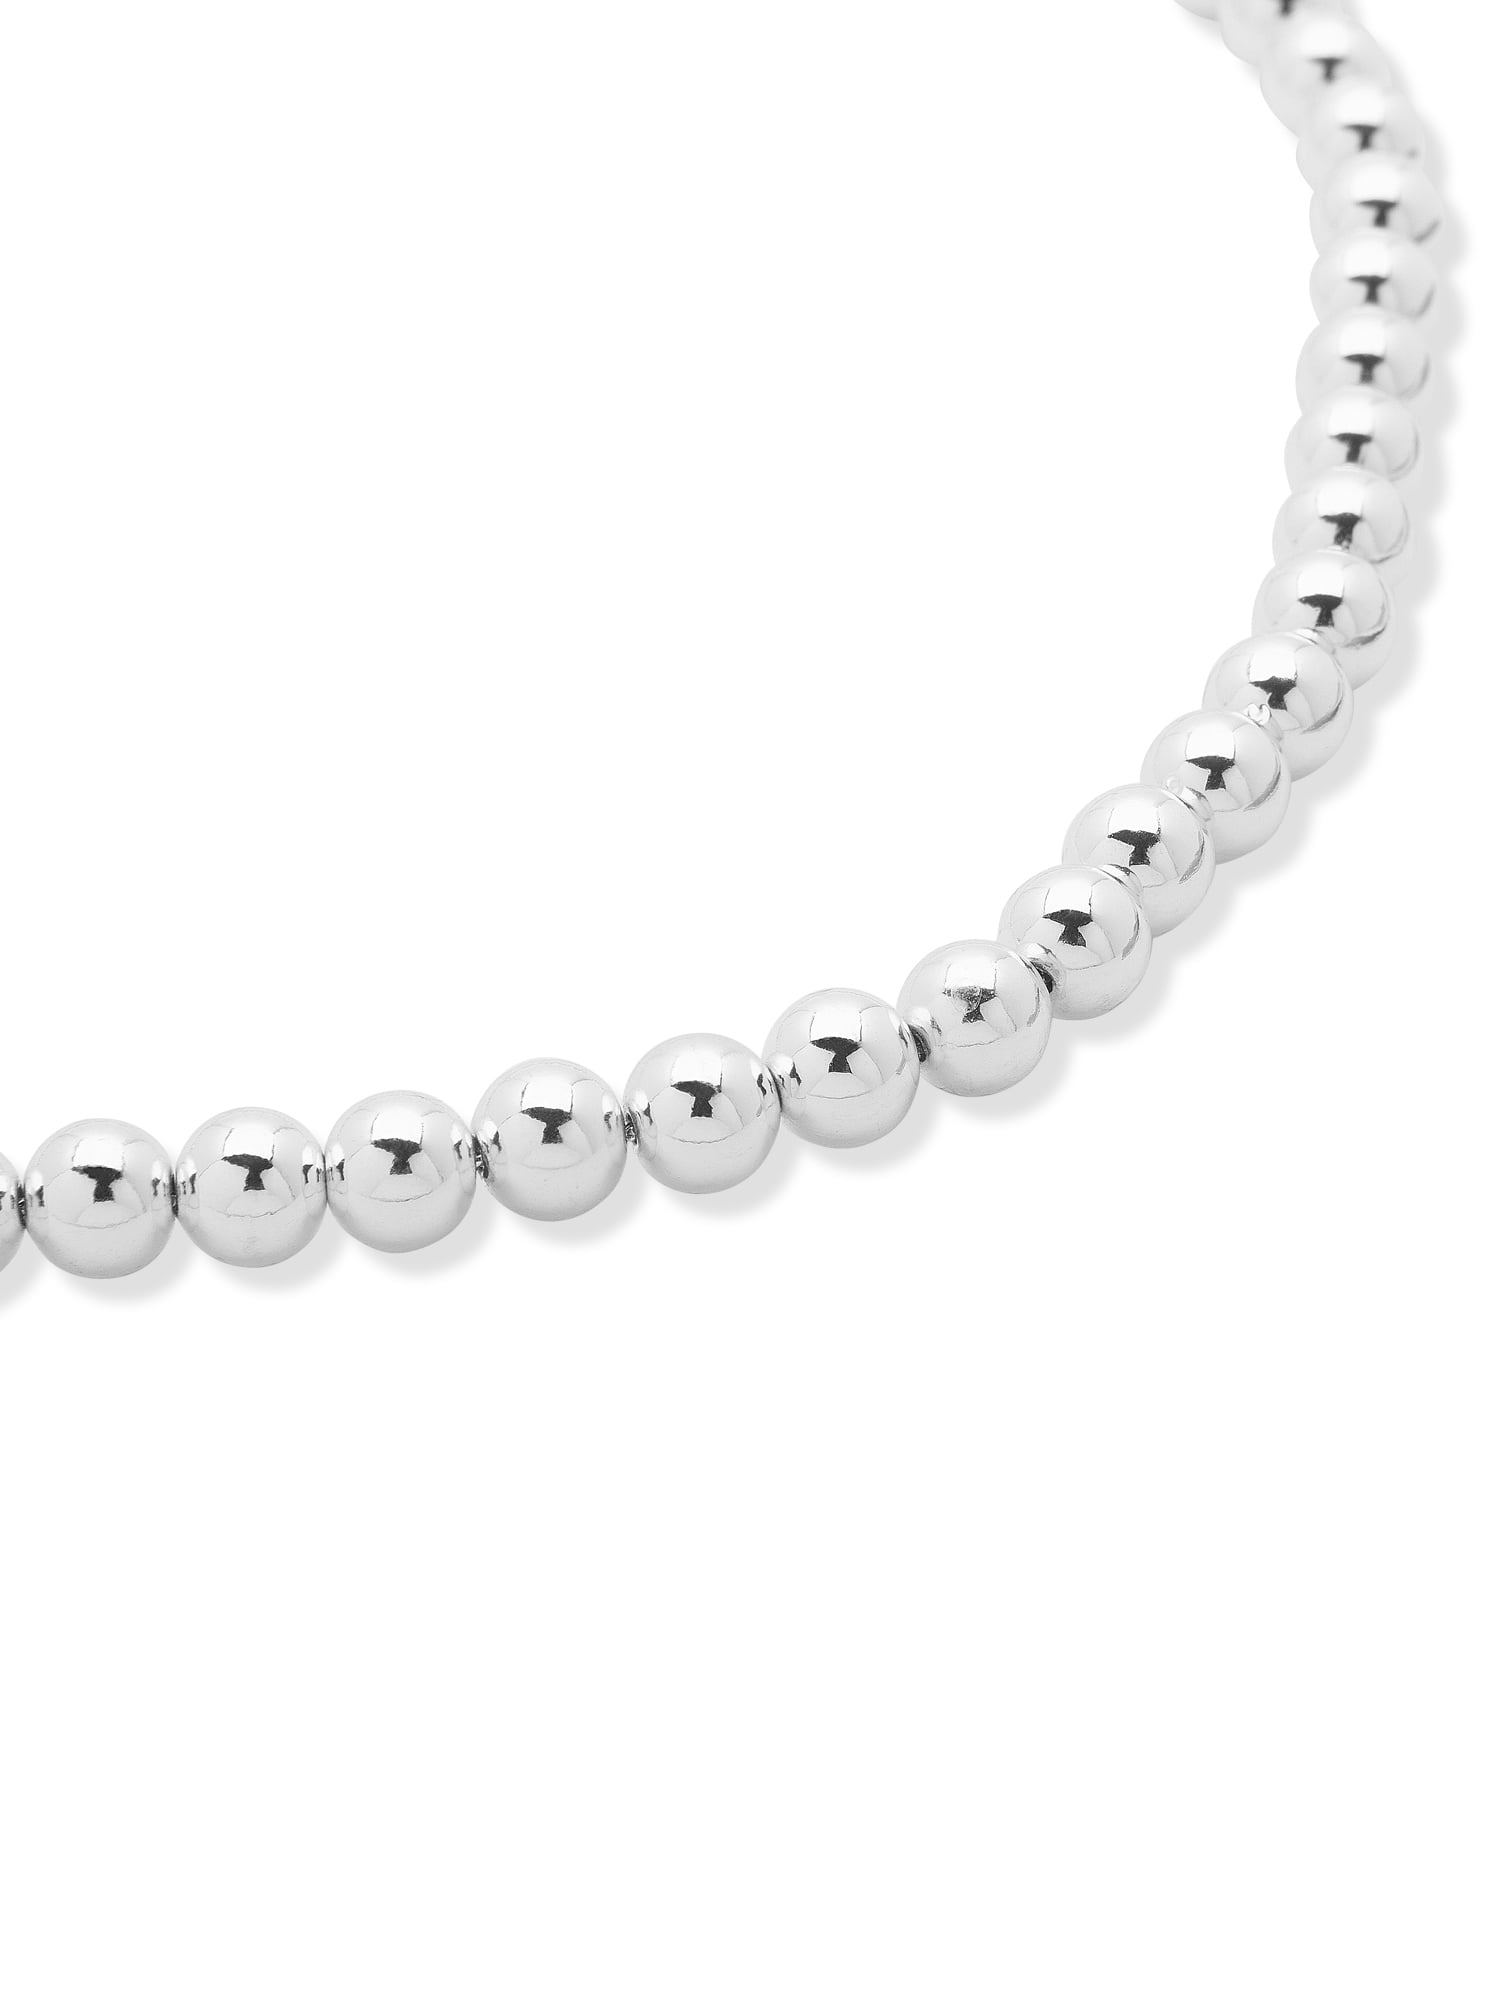 Chaps Women's Silver Tone Metal Bead Collar Necklace, 18